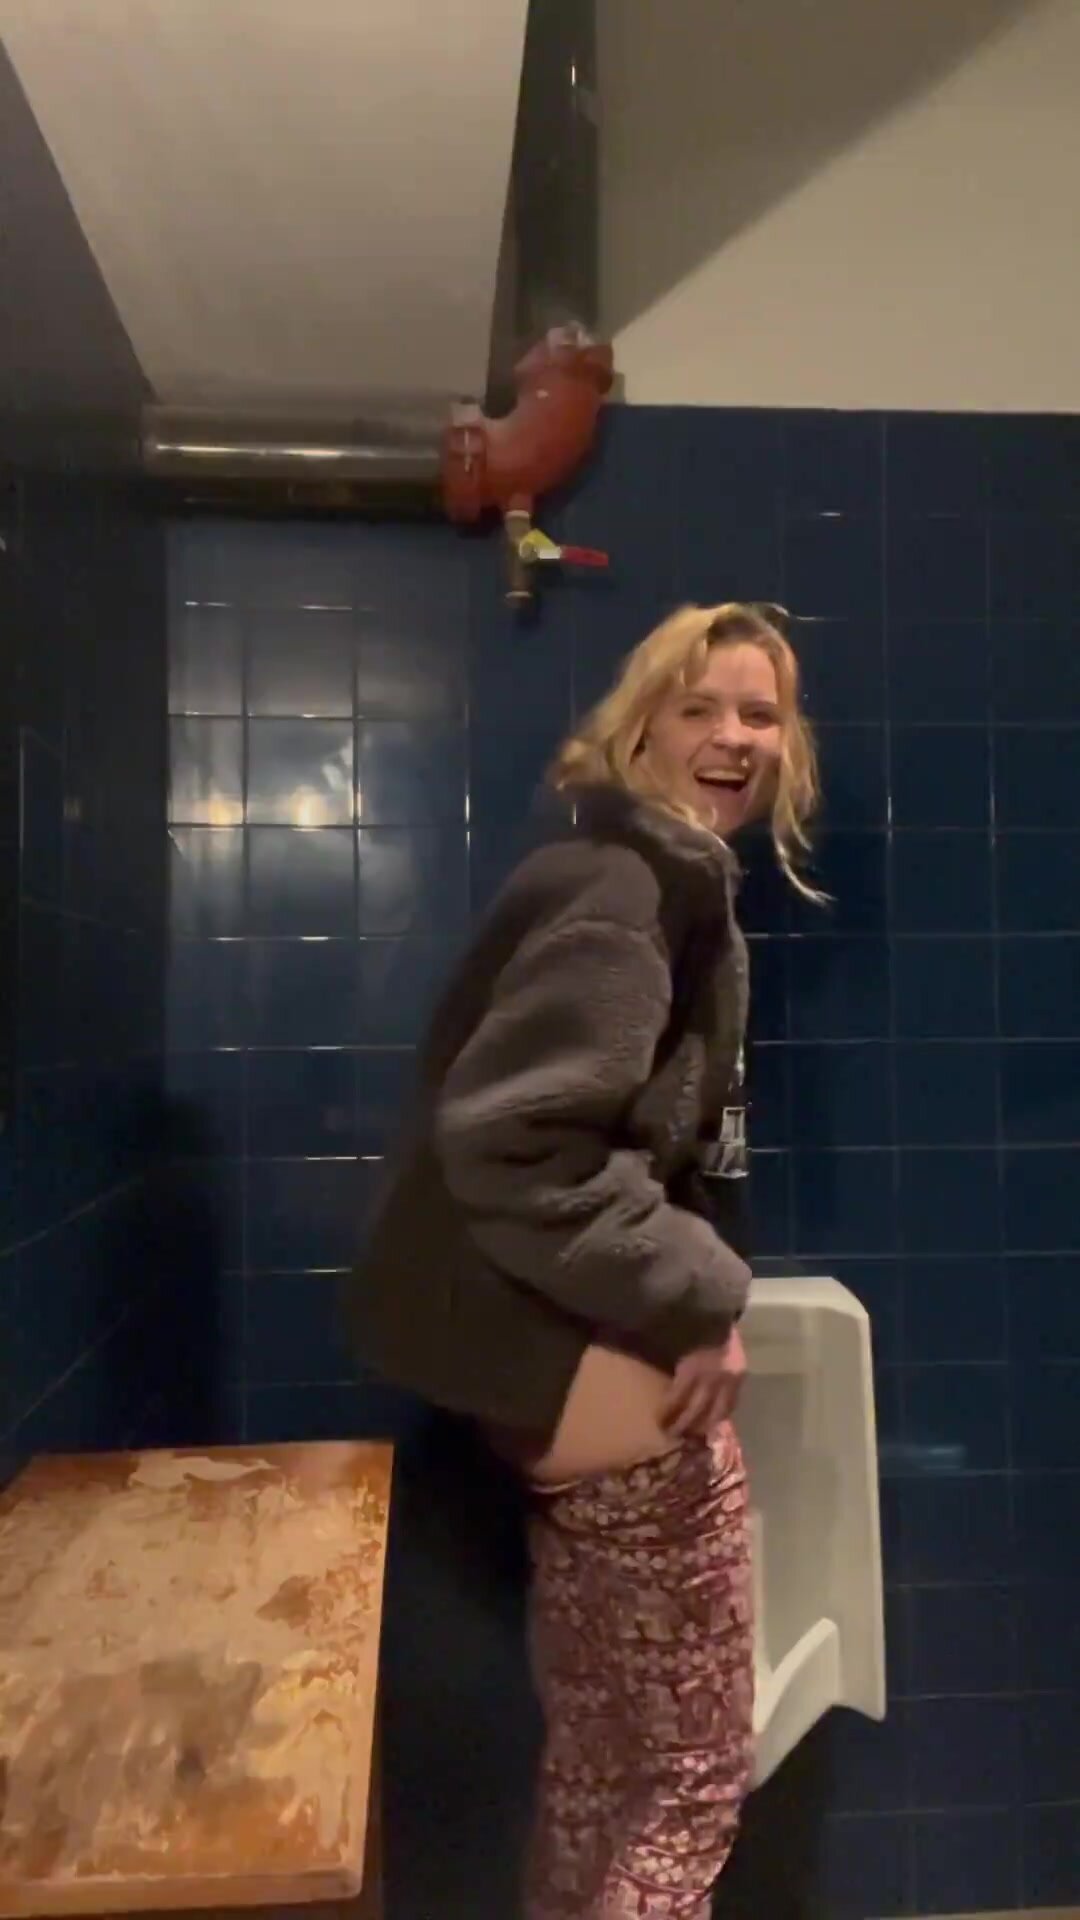 White Girl Pees in Urinal 5